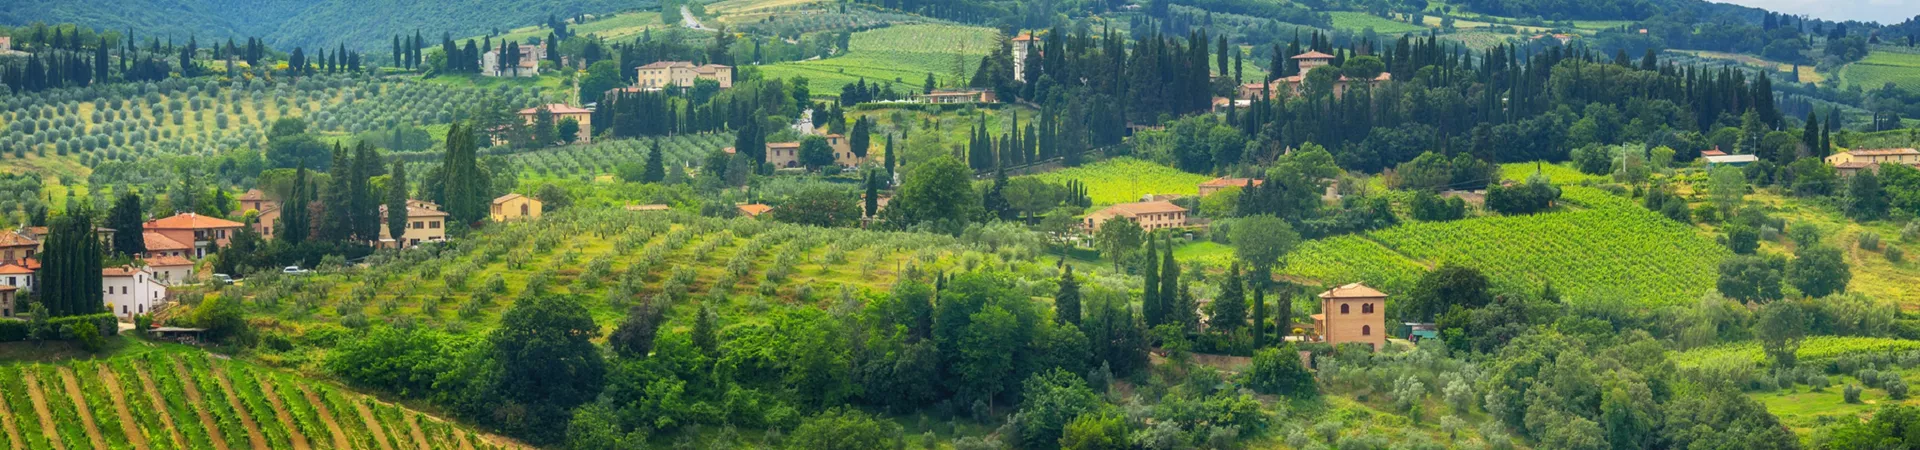 Scenic panorama of Tuscan hills in Italy